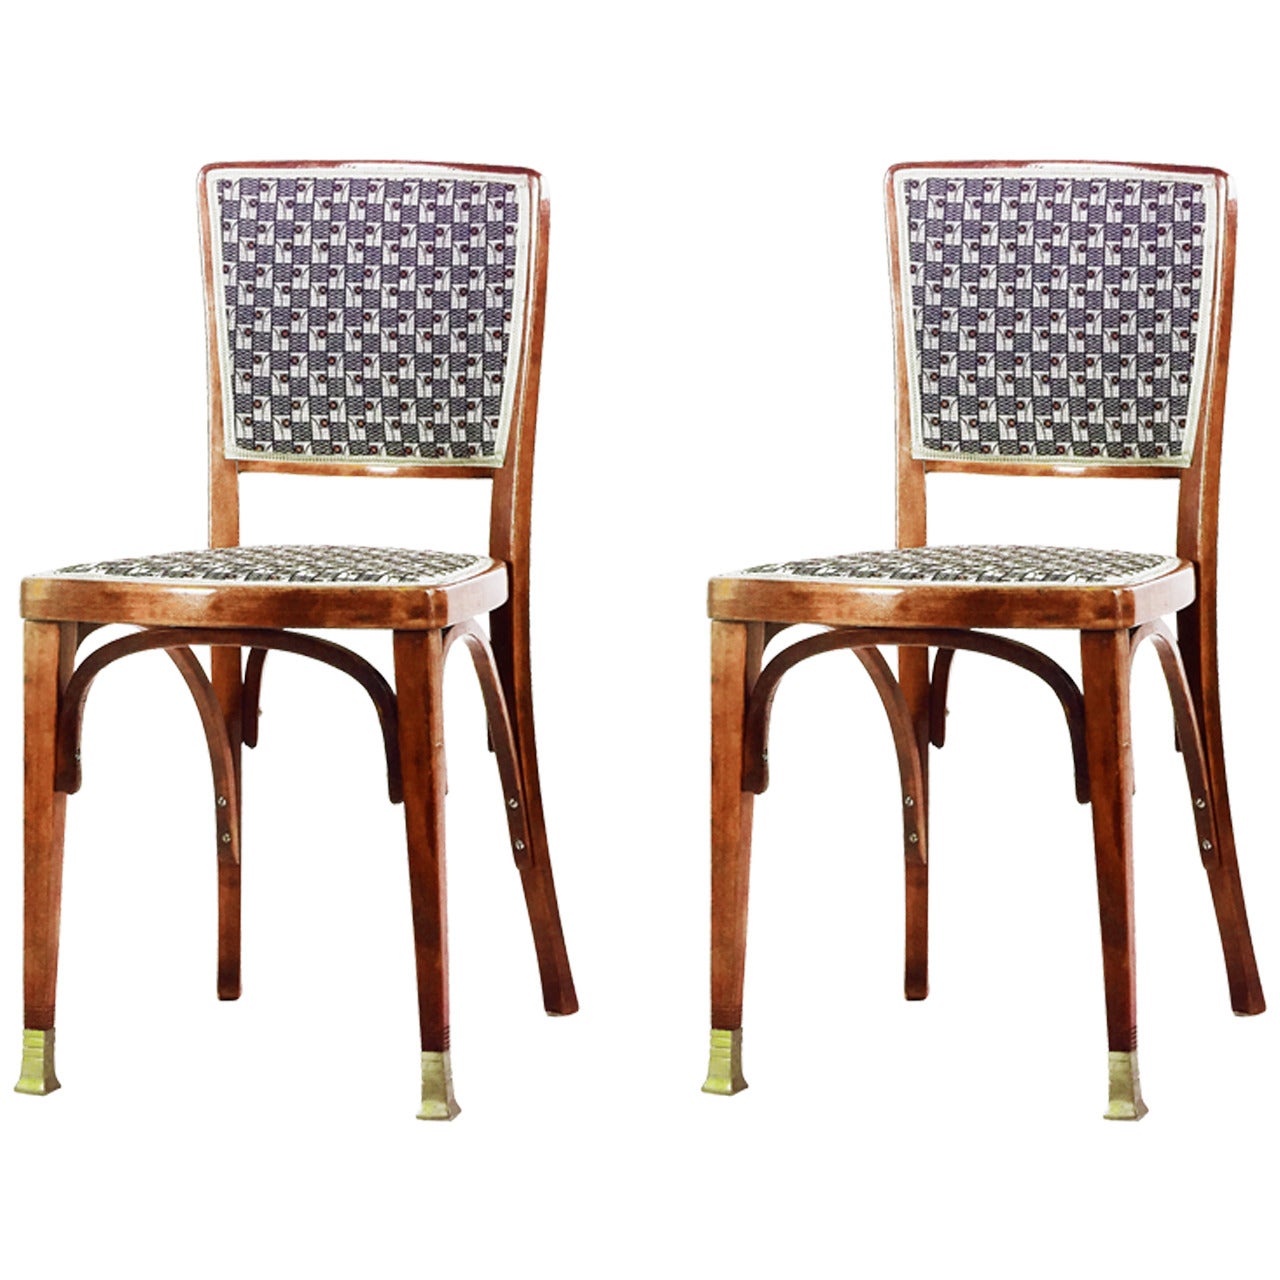 Pair of Kohn Chairs No. 719 Attributed to Koloman Moser For Sale